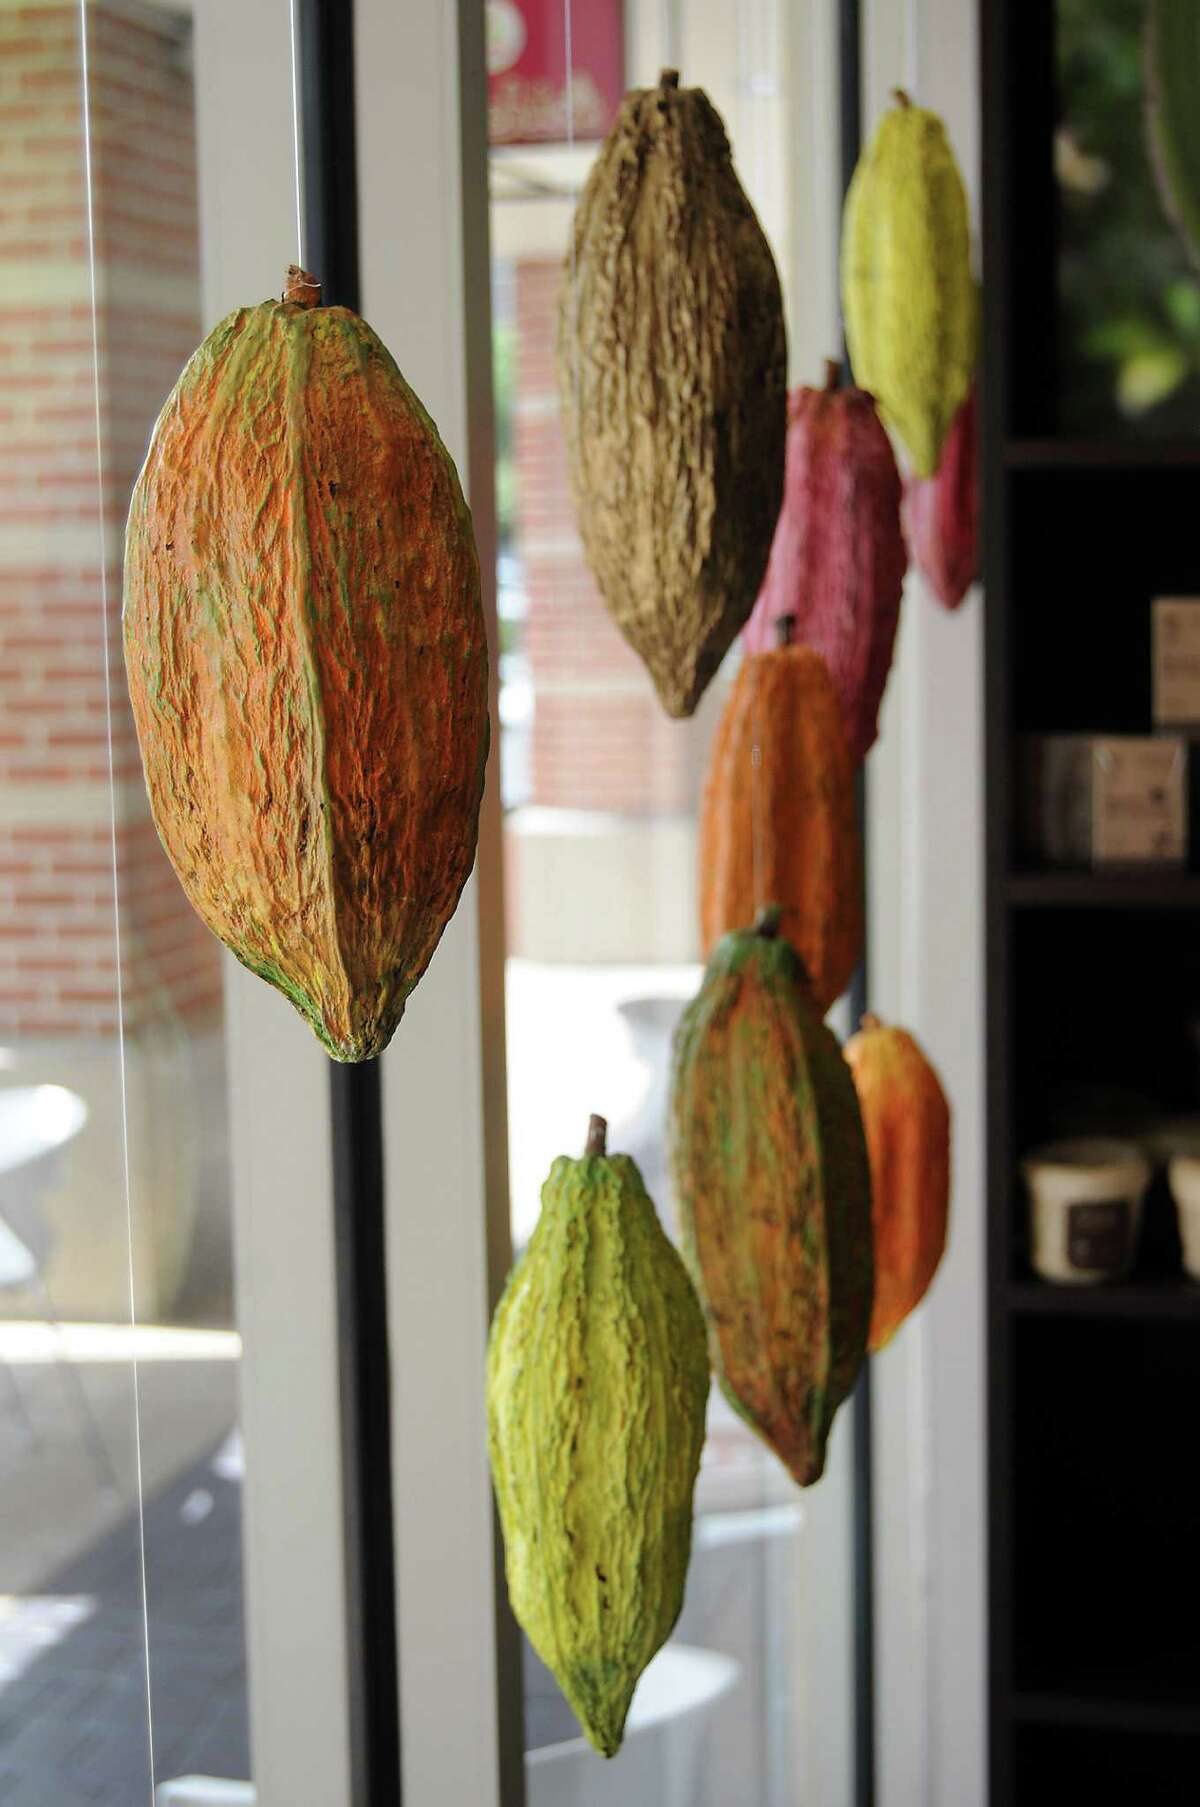 Window decorations at Cacao & Cardamom at 5000 Westheimer Thursday July 03, 2014. (Dave Rossman photo)